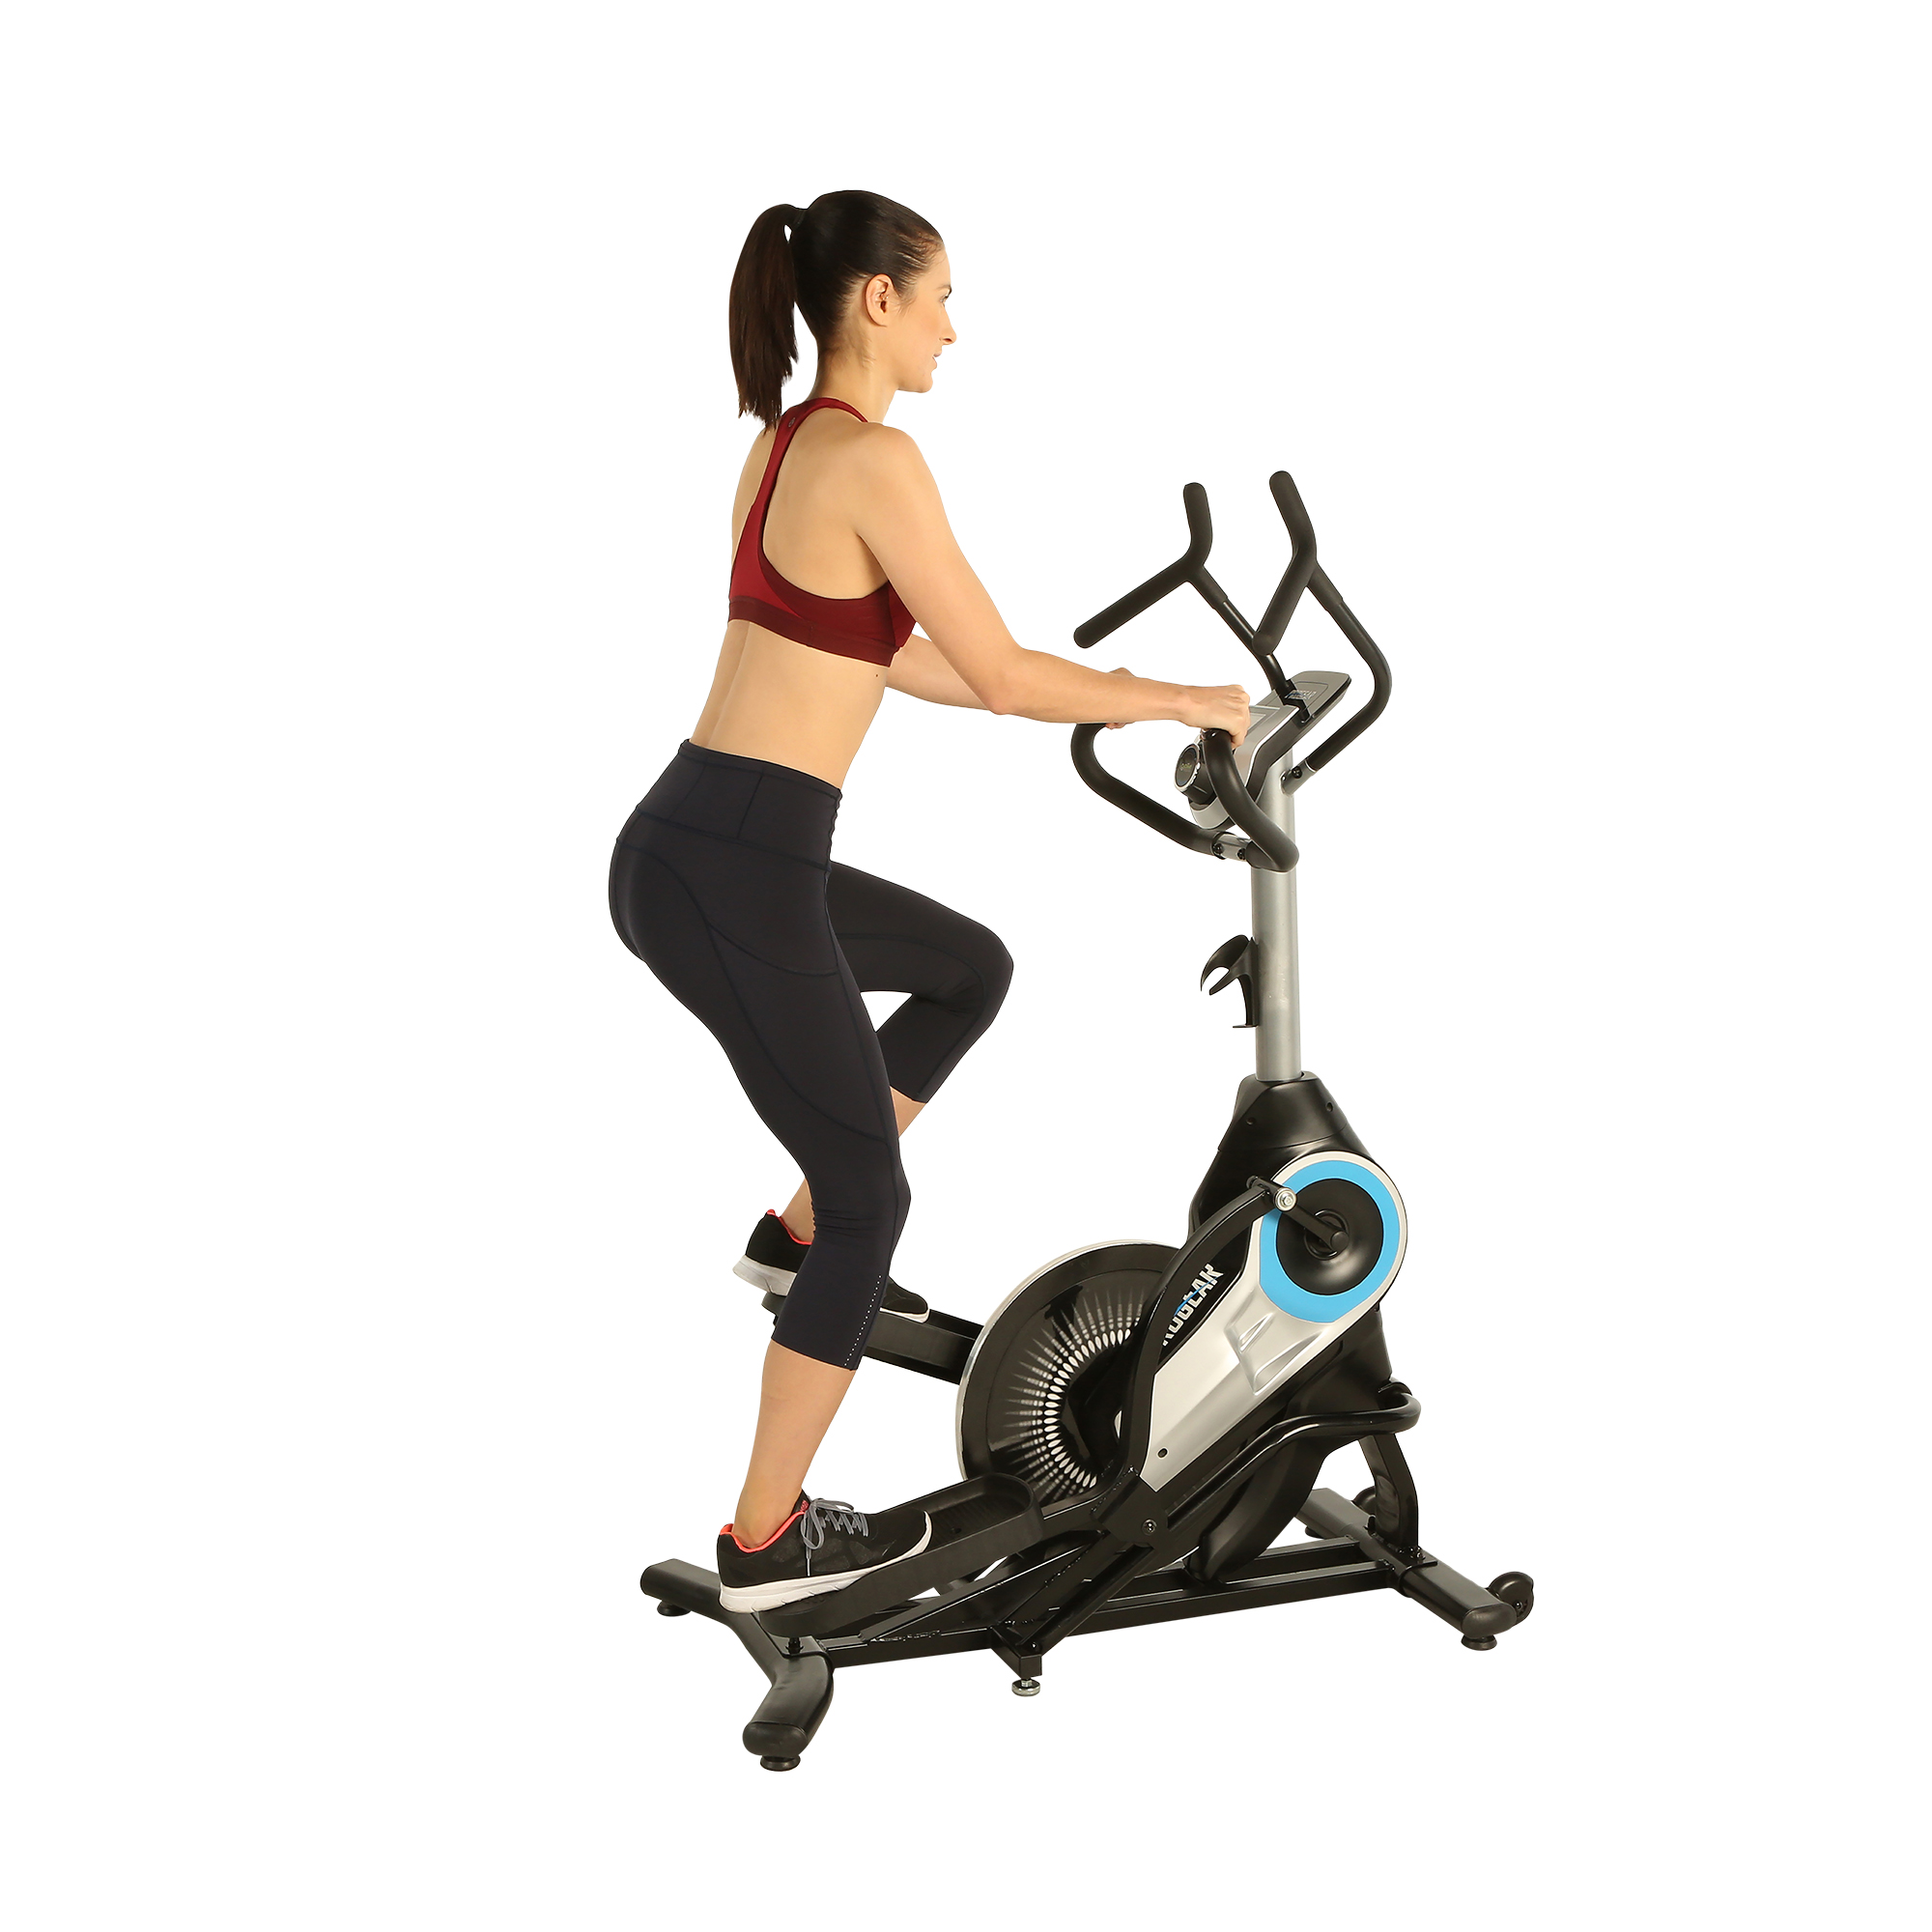 PROGEAR 9900 HIIT Bluetooth Smart Cloud Fitness Crossover Stepper/ Elliptical Trainer with Goal Setting and Free App - image 19 of 19